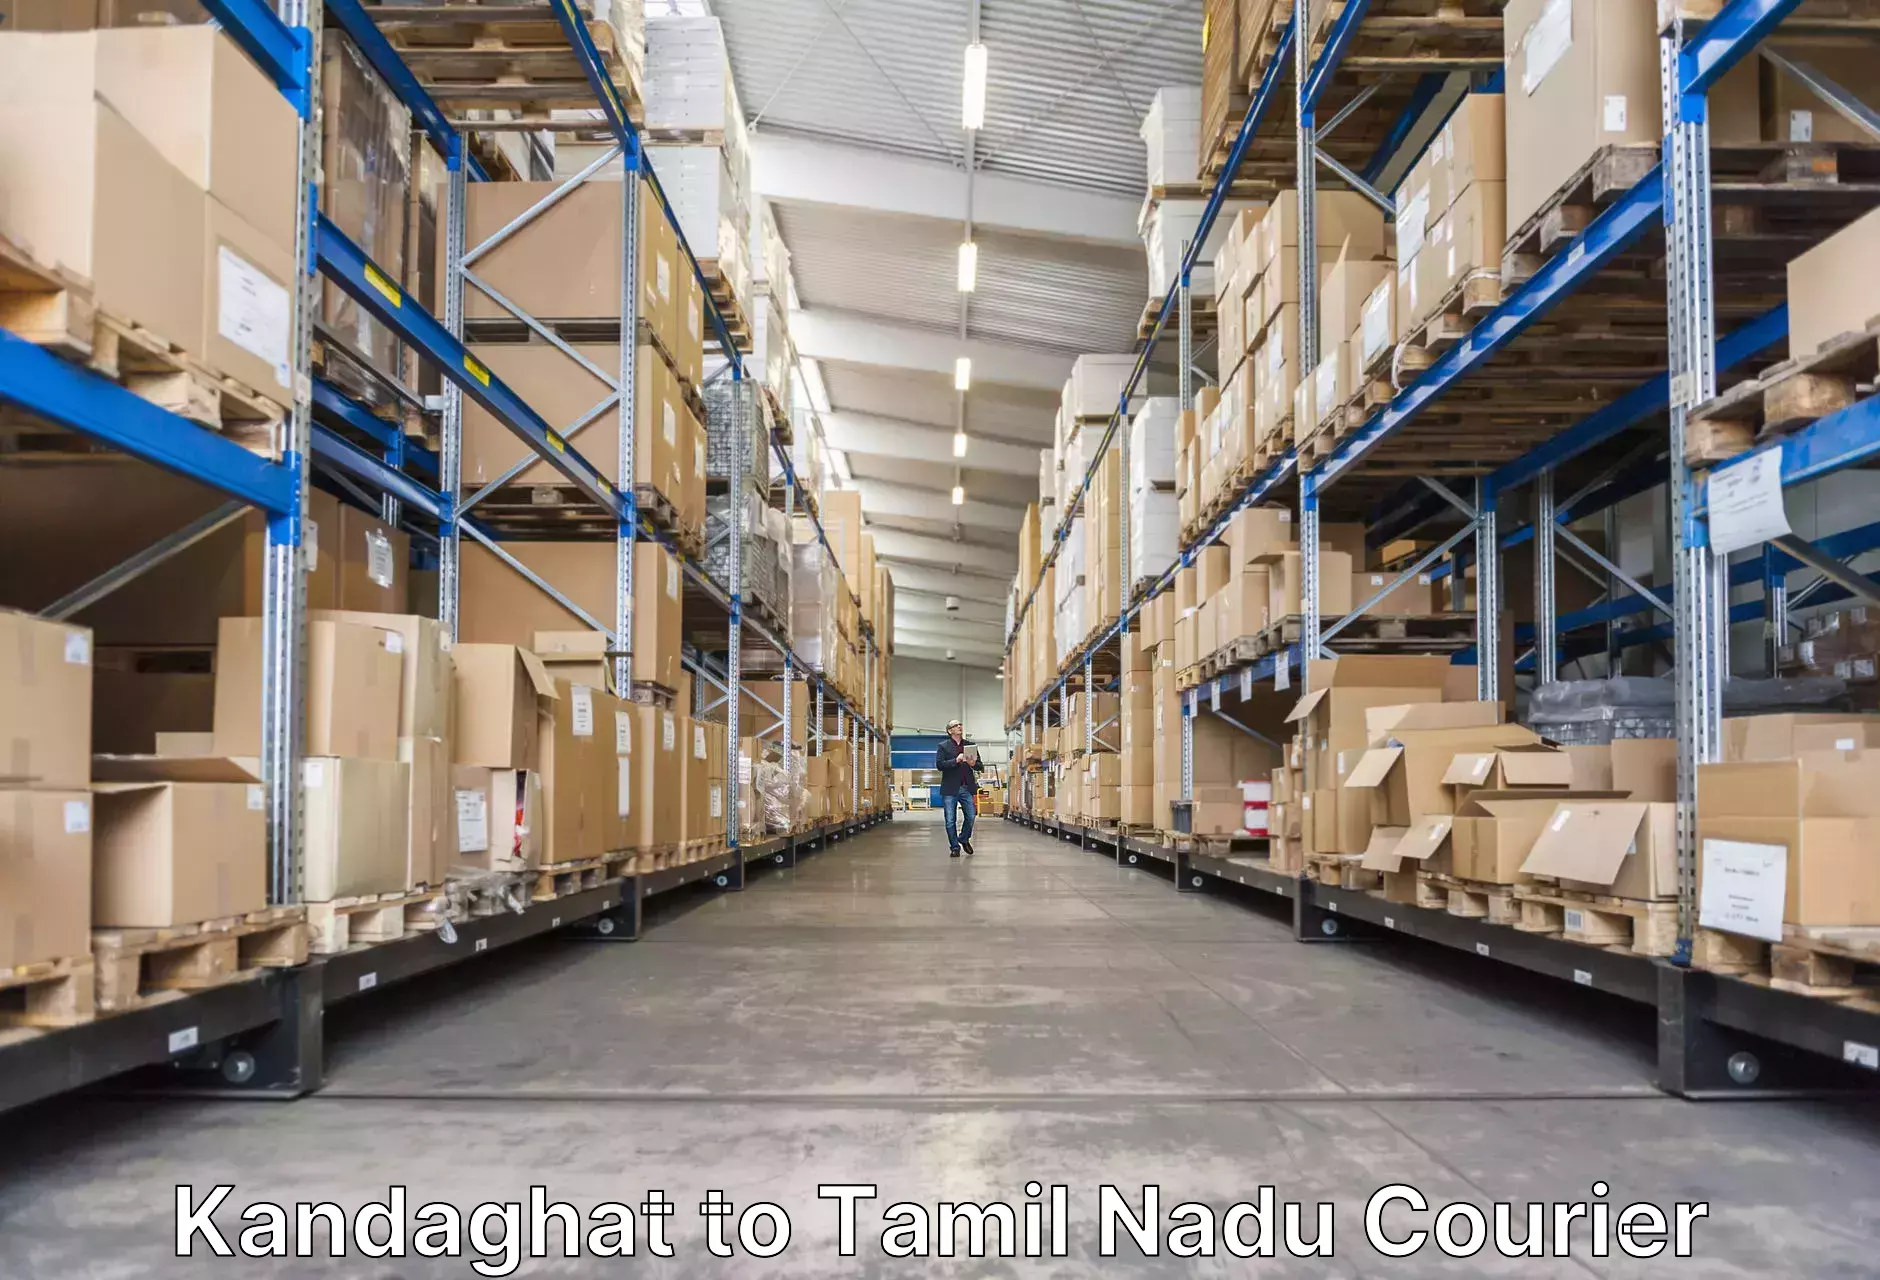 Luggage transport consultancy Kandaghat to Tamil Nadu